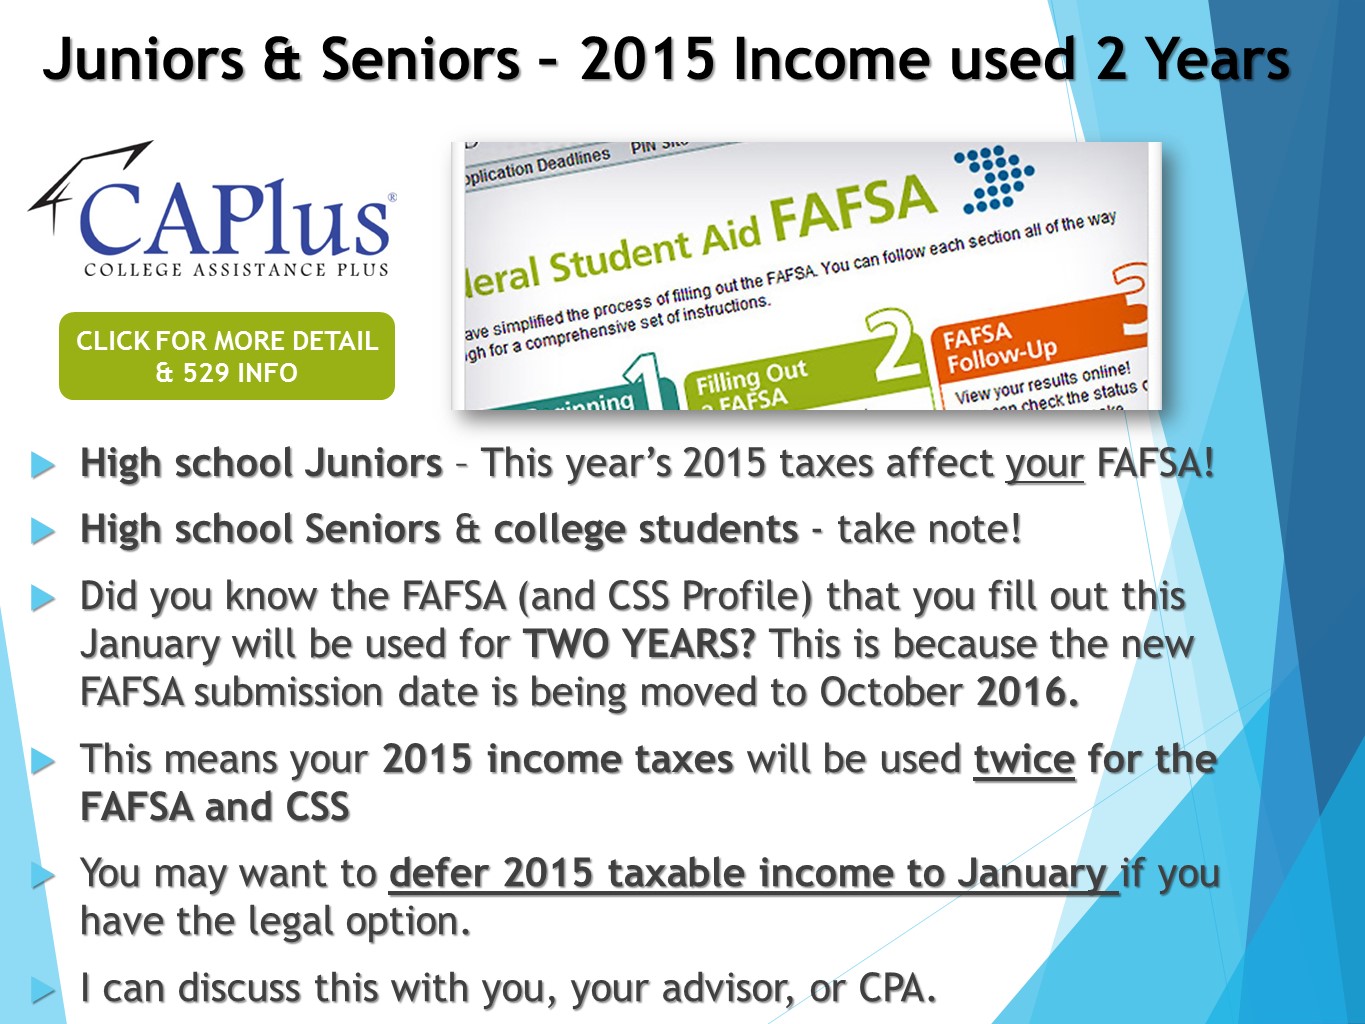 FAFSA Actions1